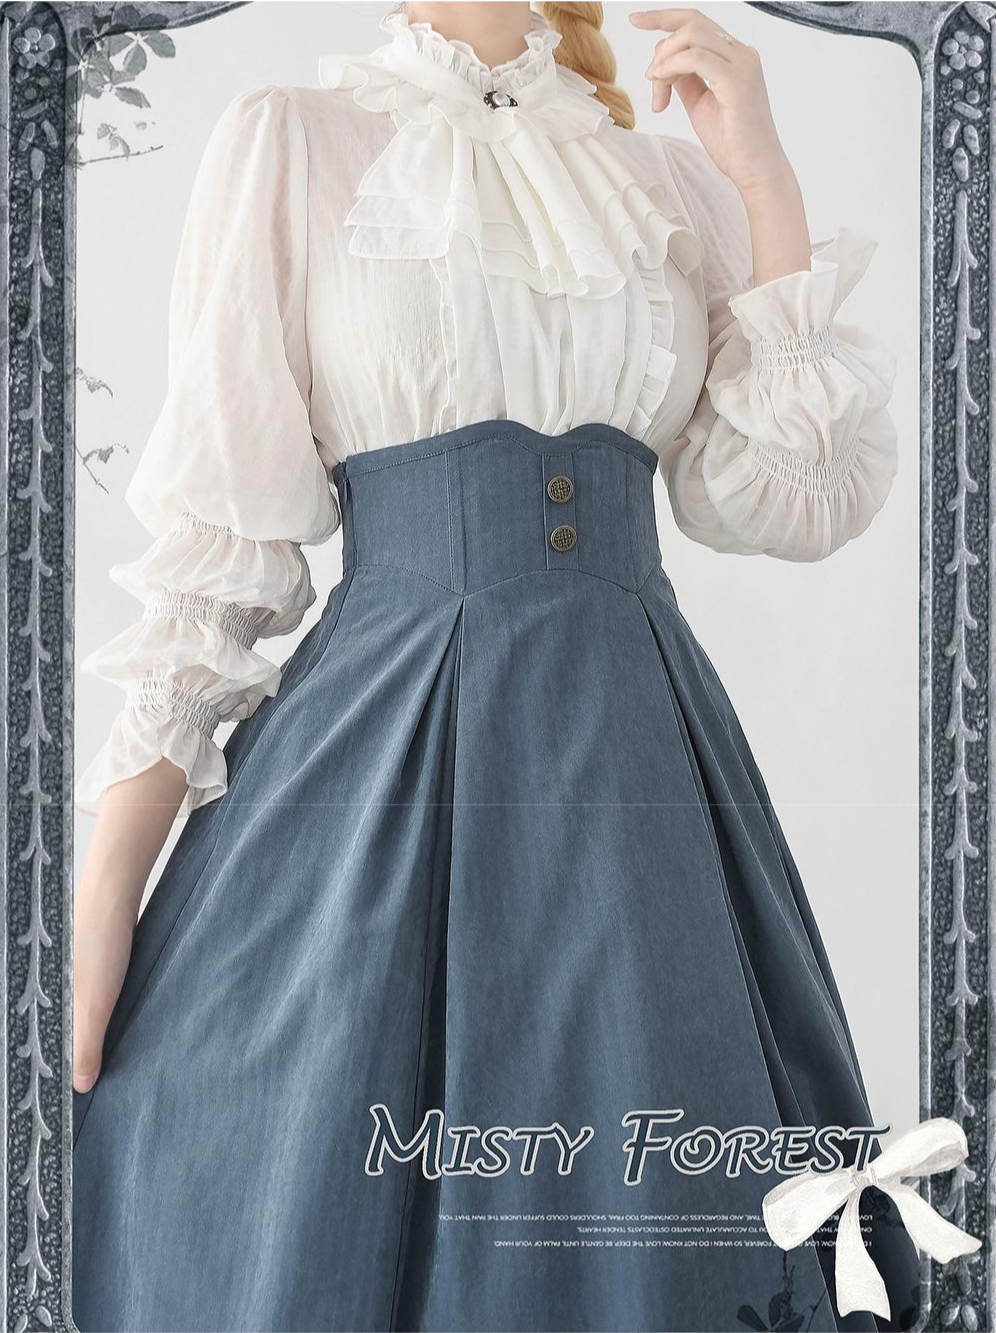 Misty Forest blouse with jabot [20% off when purchased together]